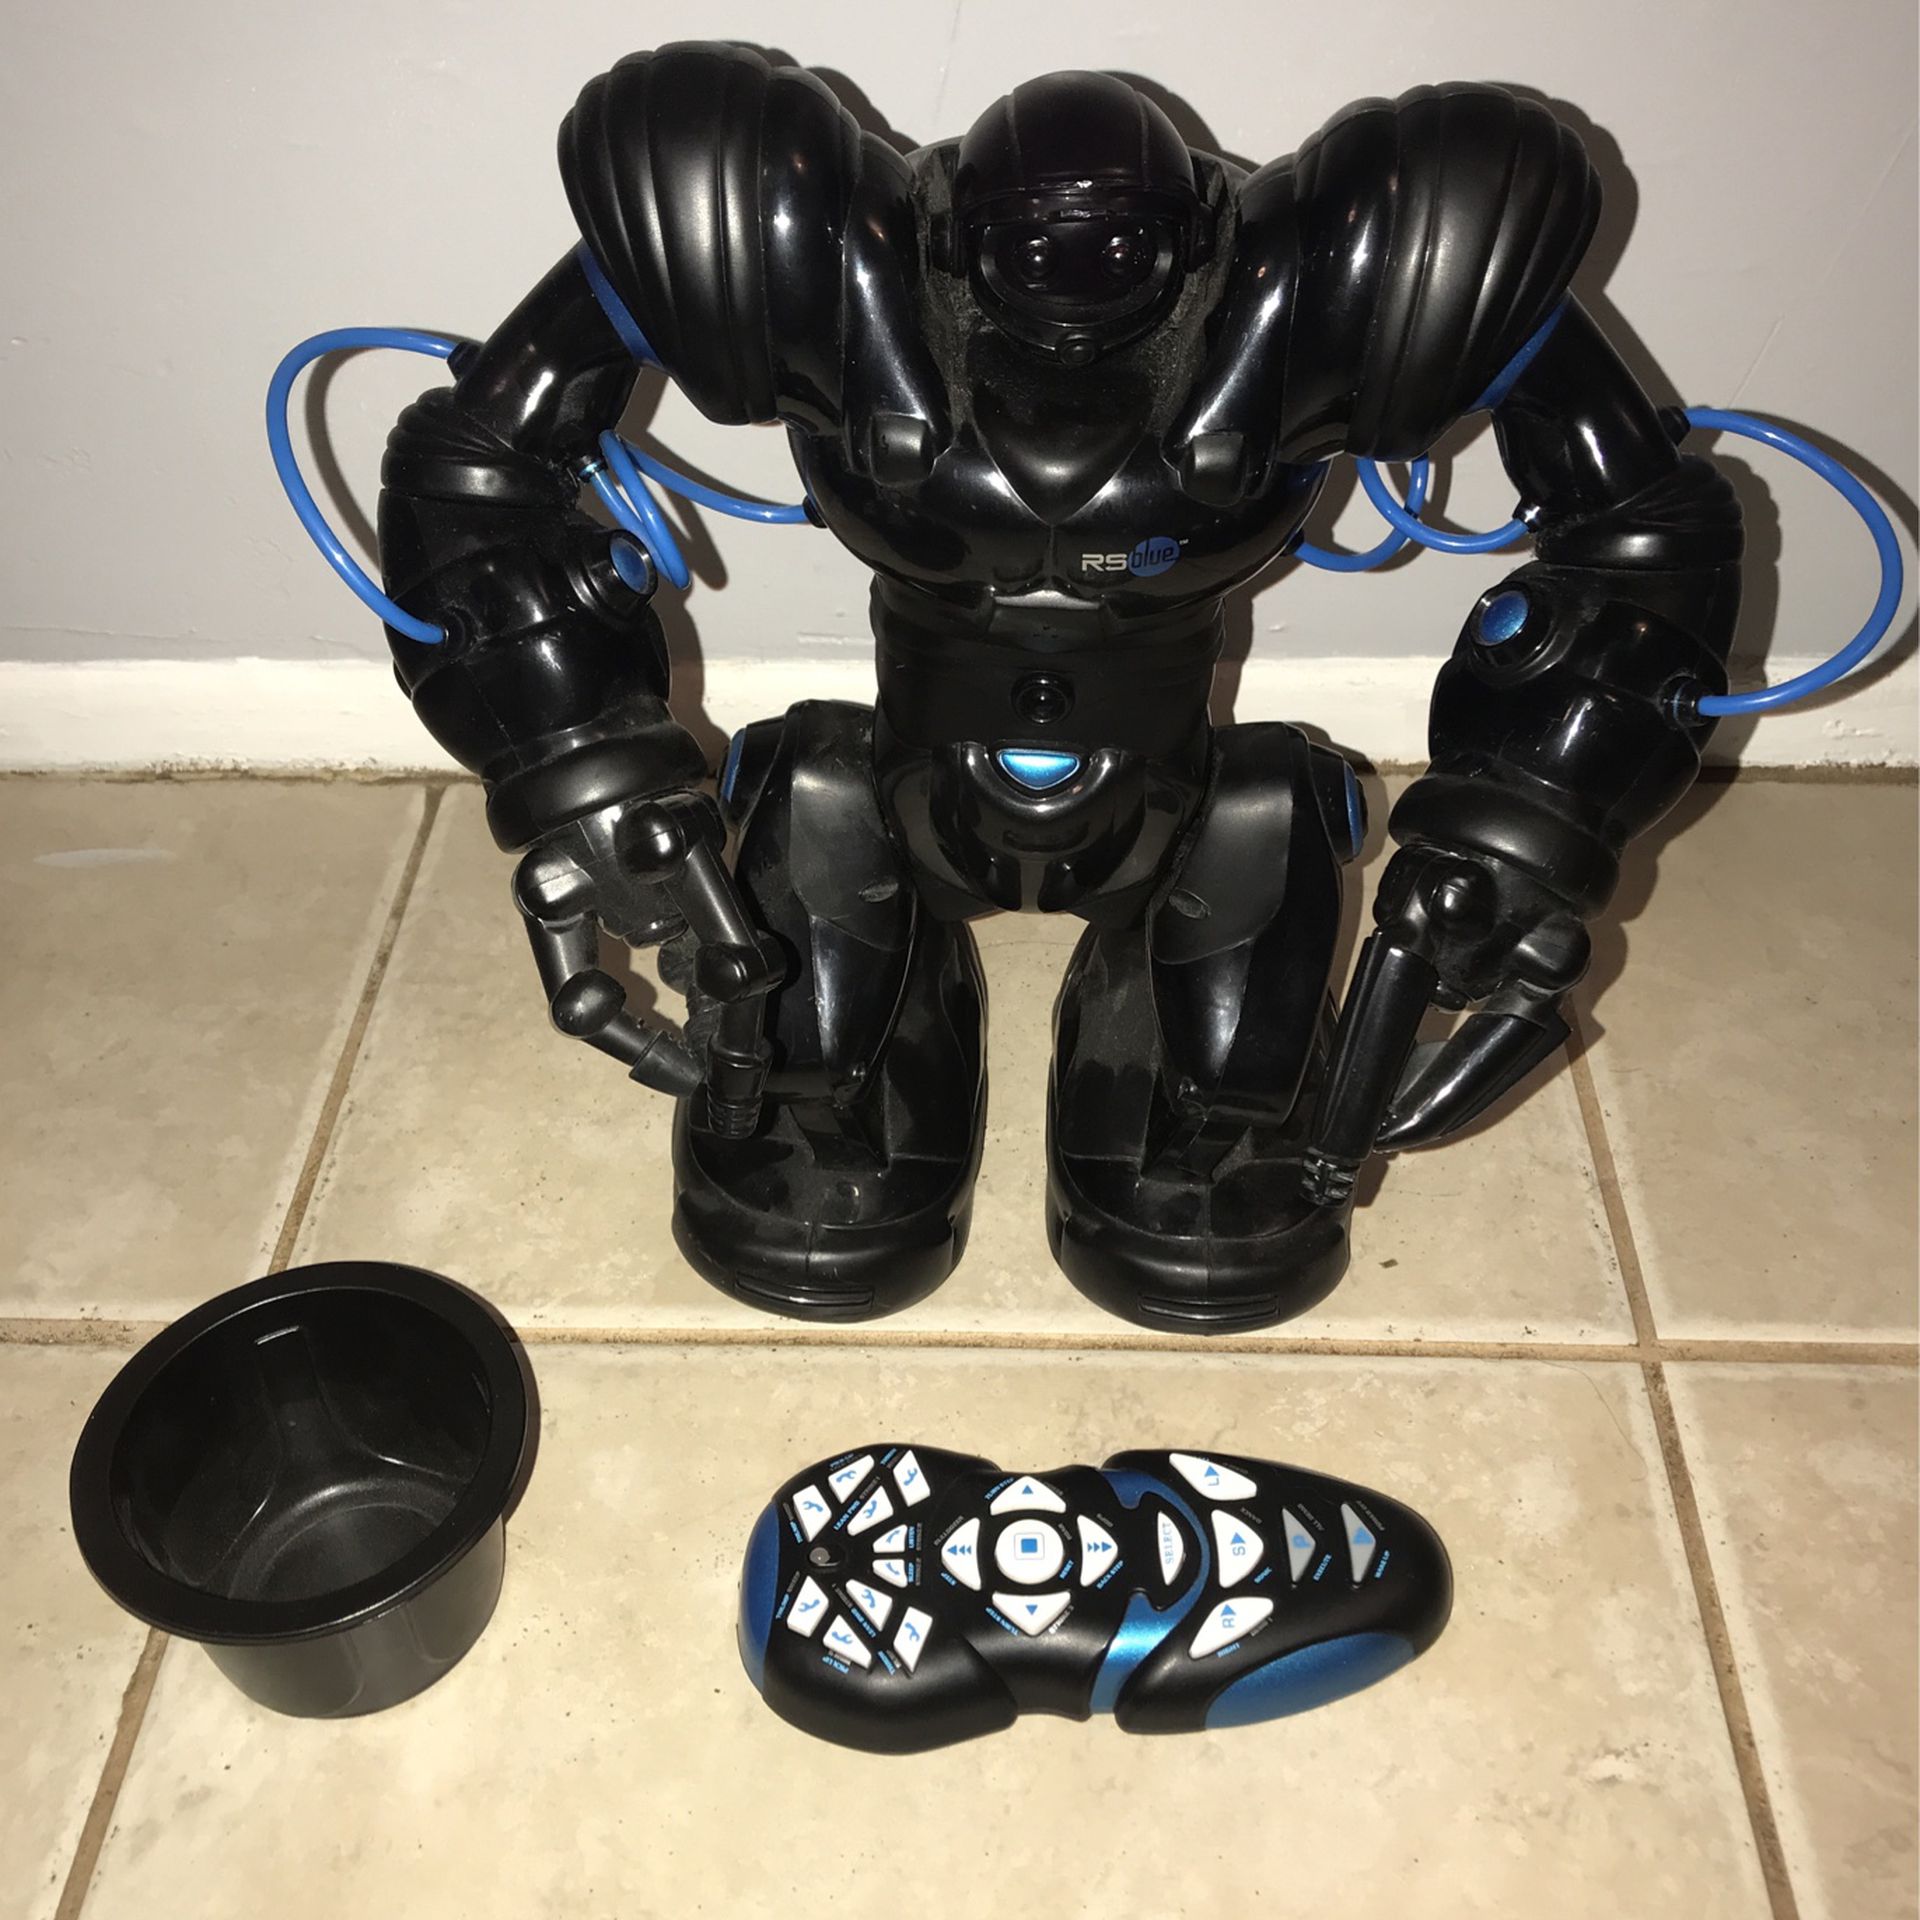 Wowwee RS Blue Toy Robot 14"